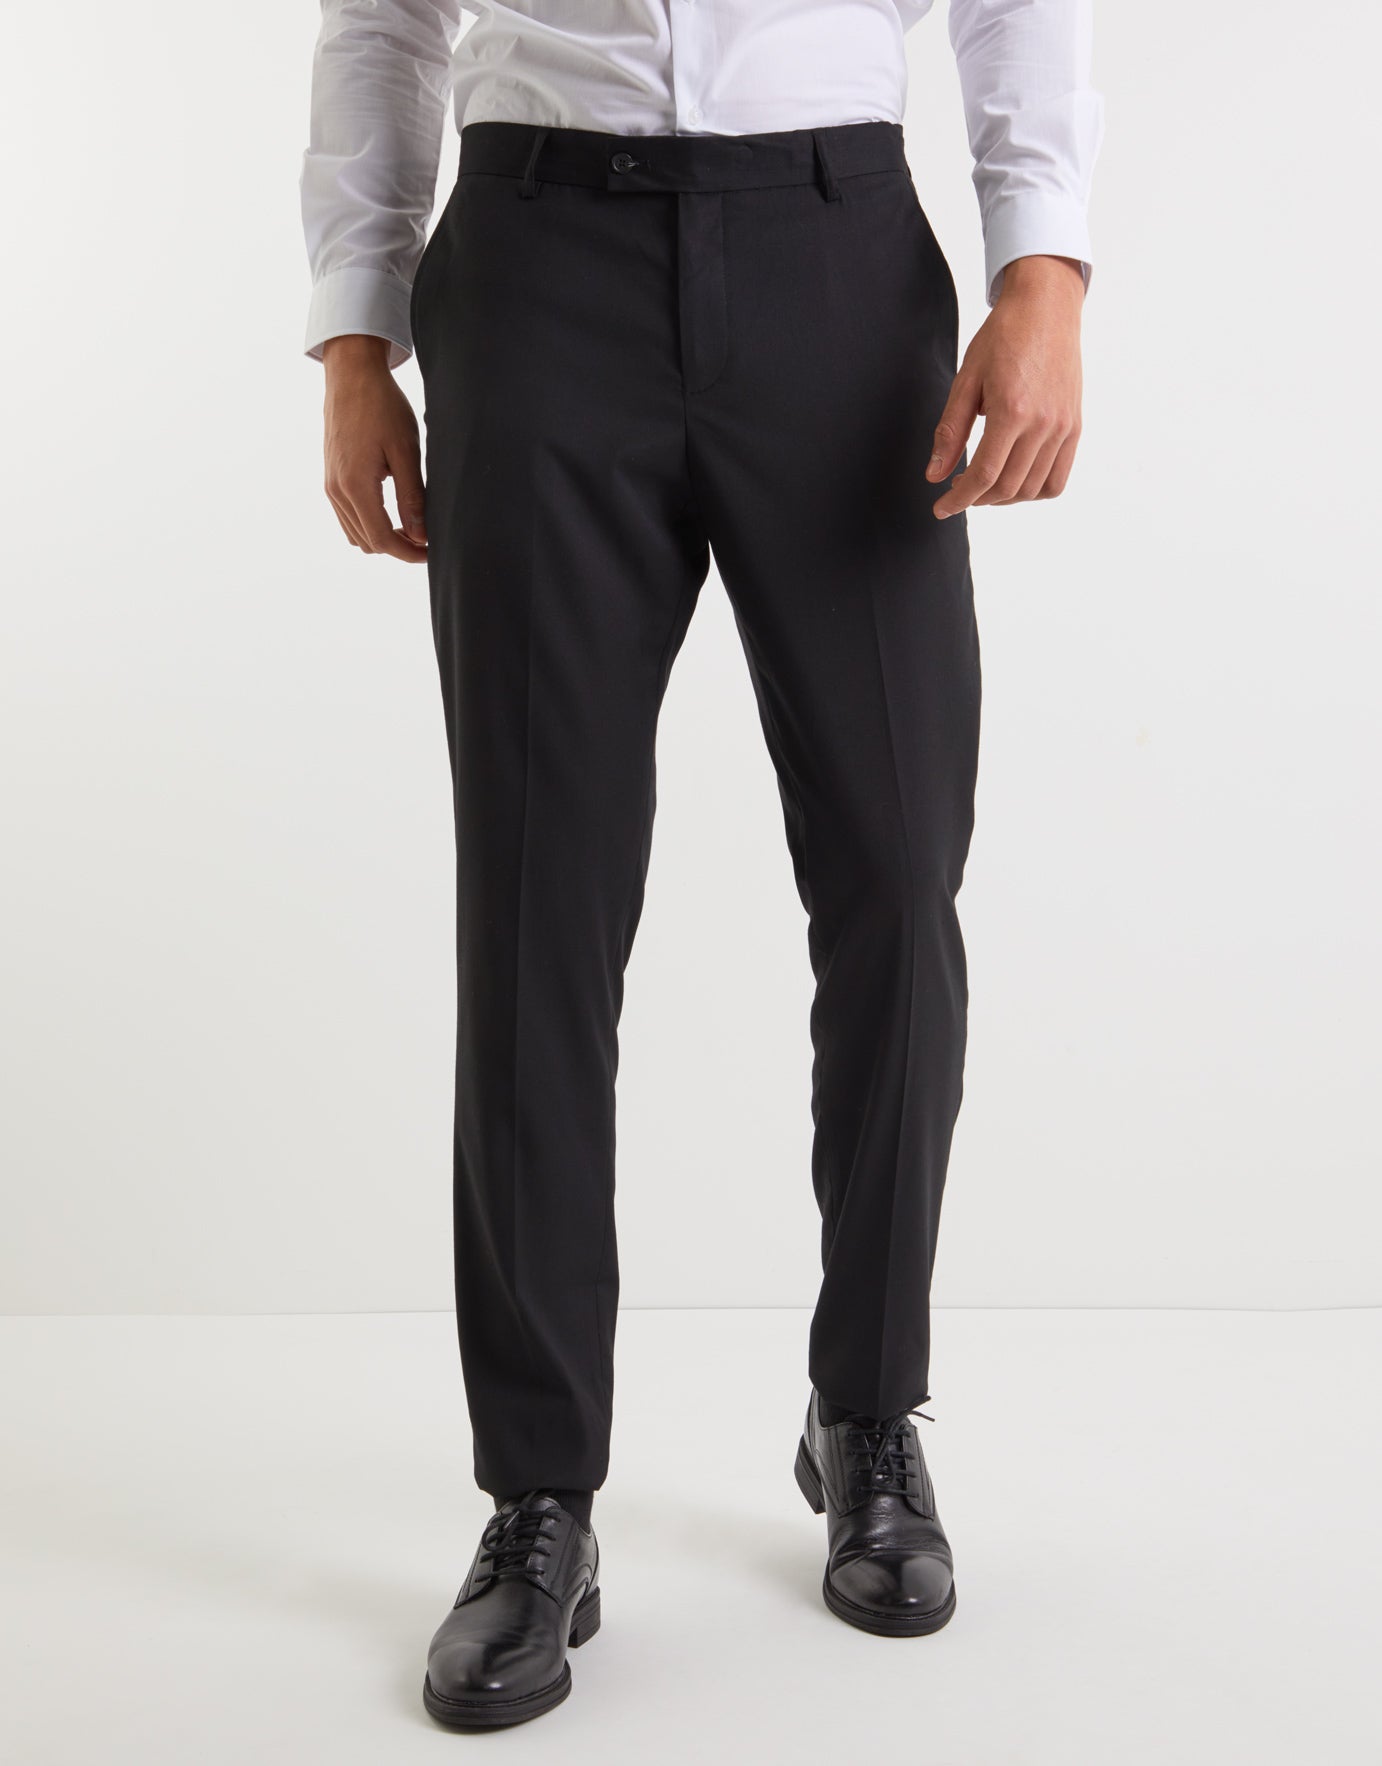 Black Suit with Trouser and White Shirt